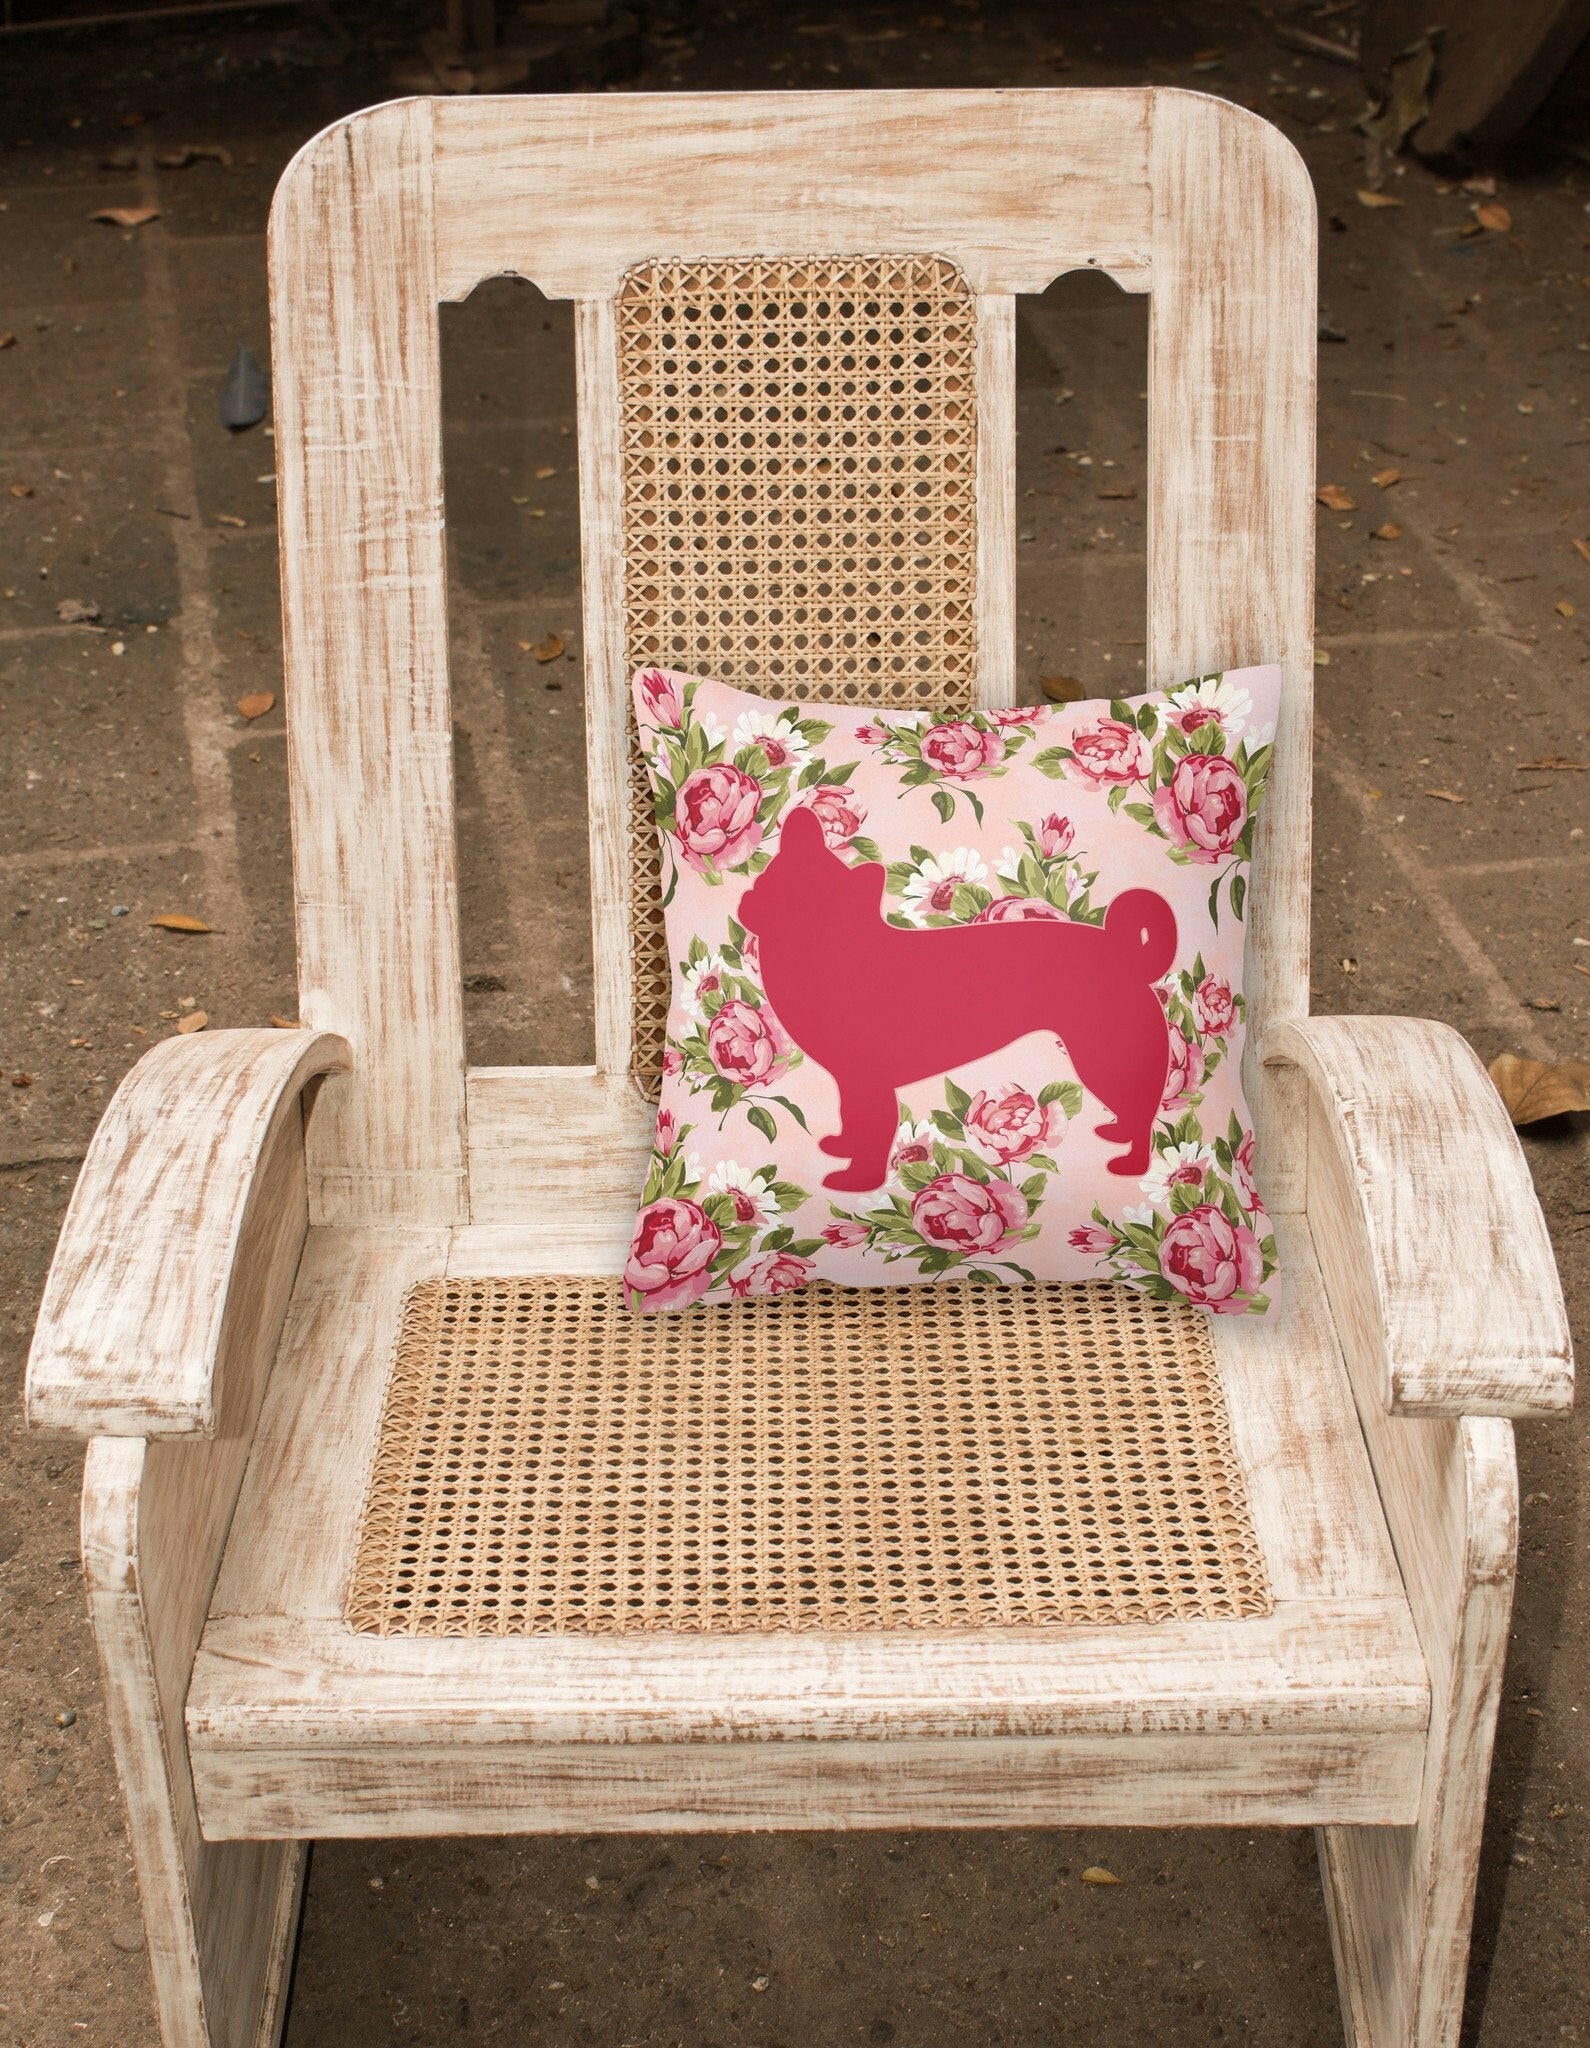 Chihuahua Shabby Chic Pink Roses  Fabric Decorative Pillow BB1068-RS-PK-PW1414 - the-store.com